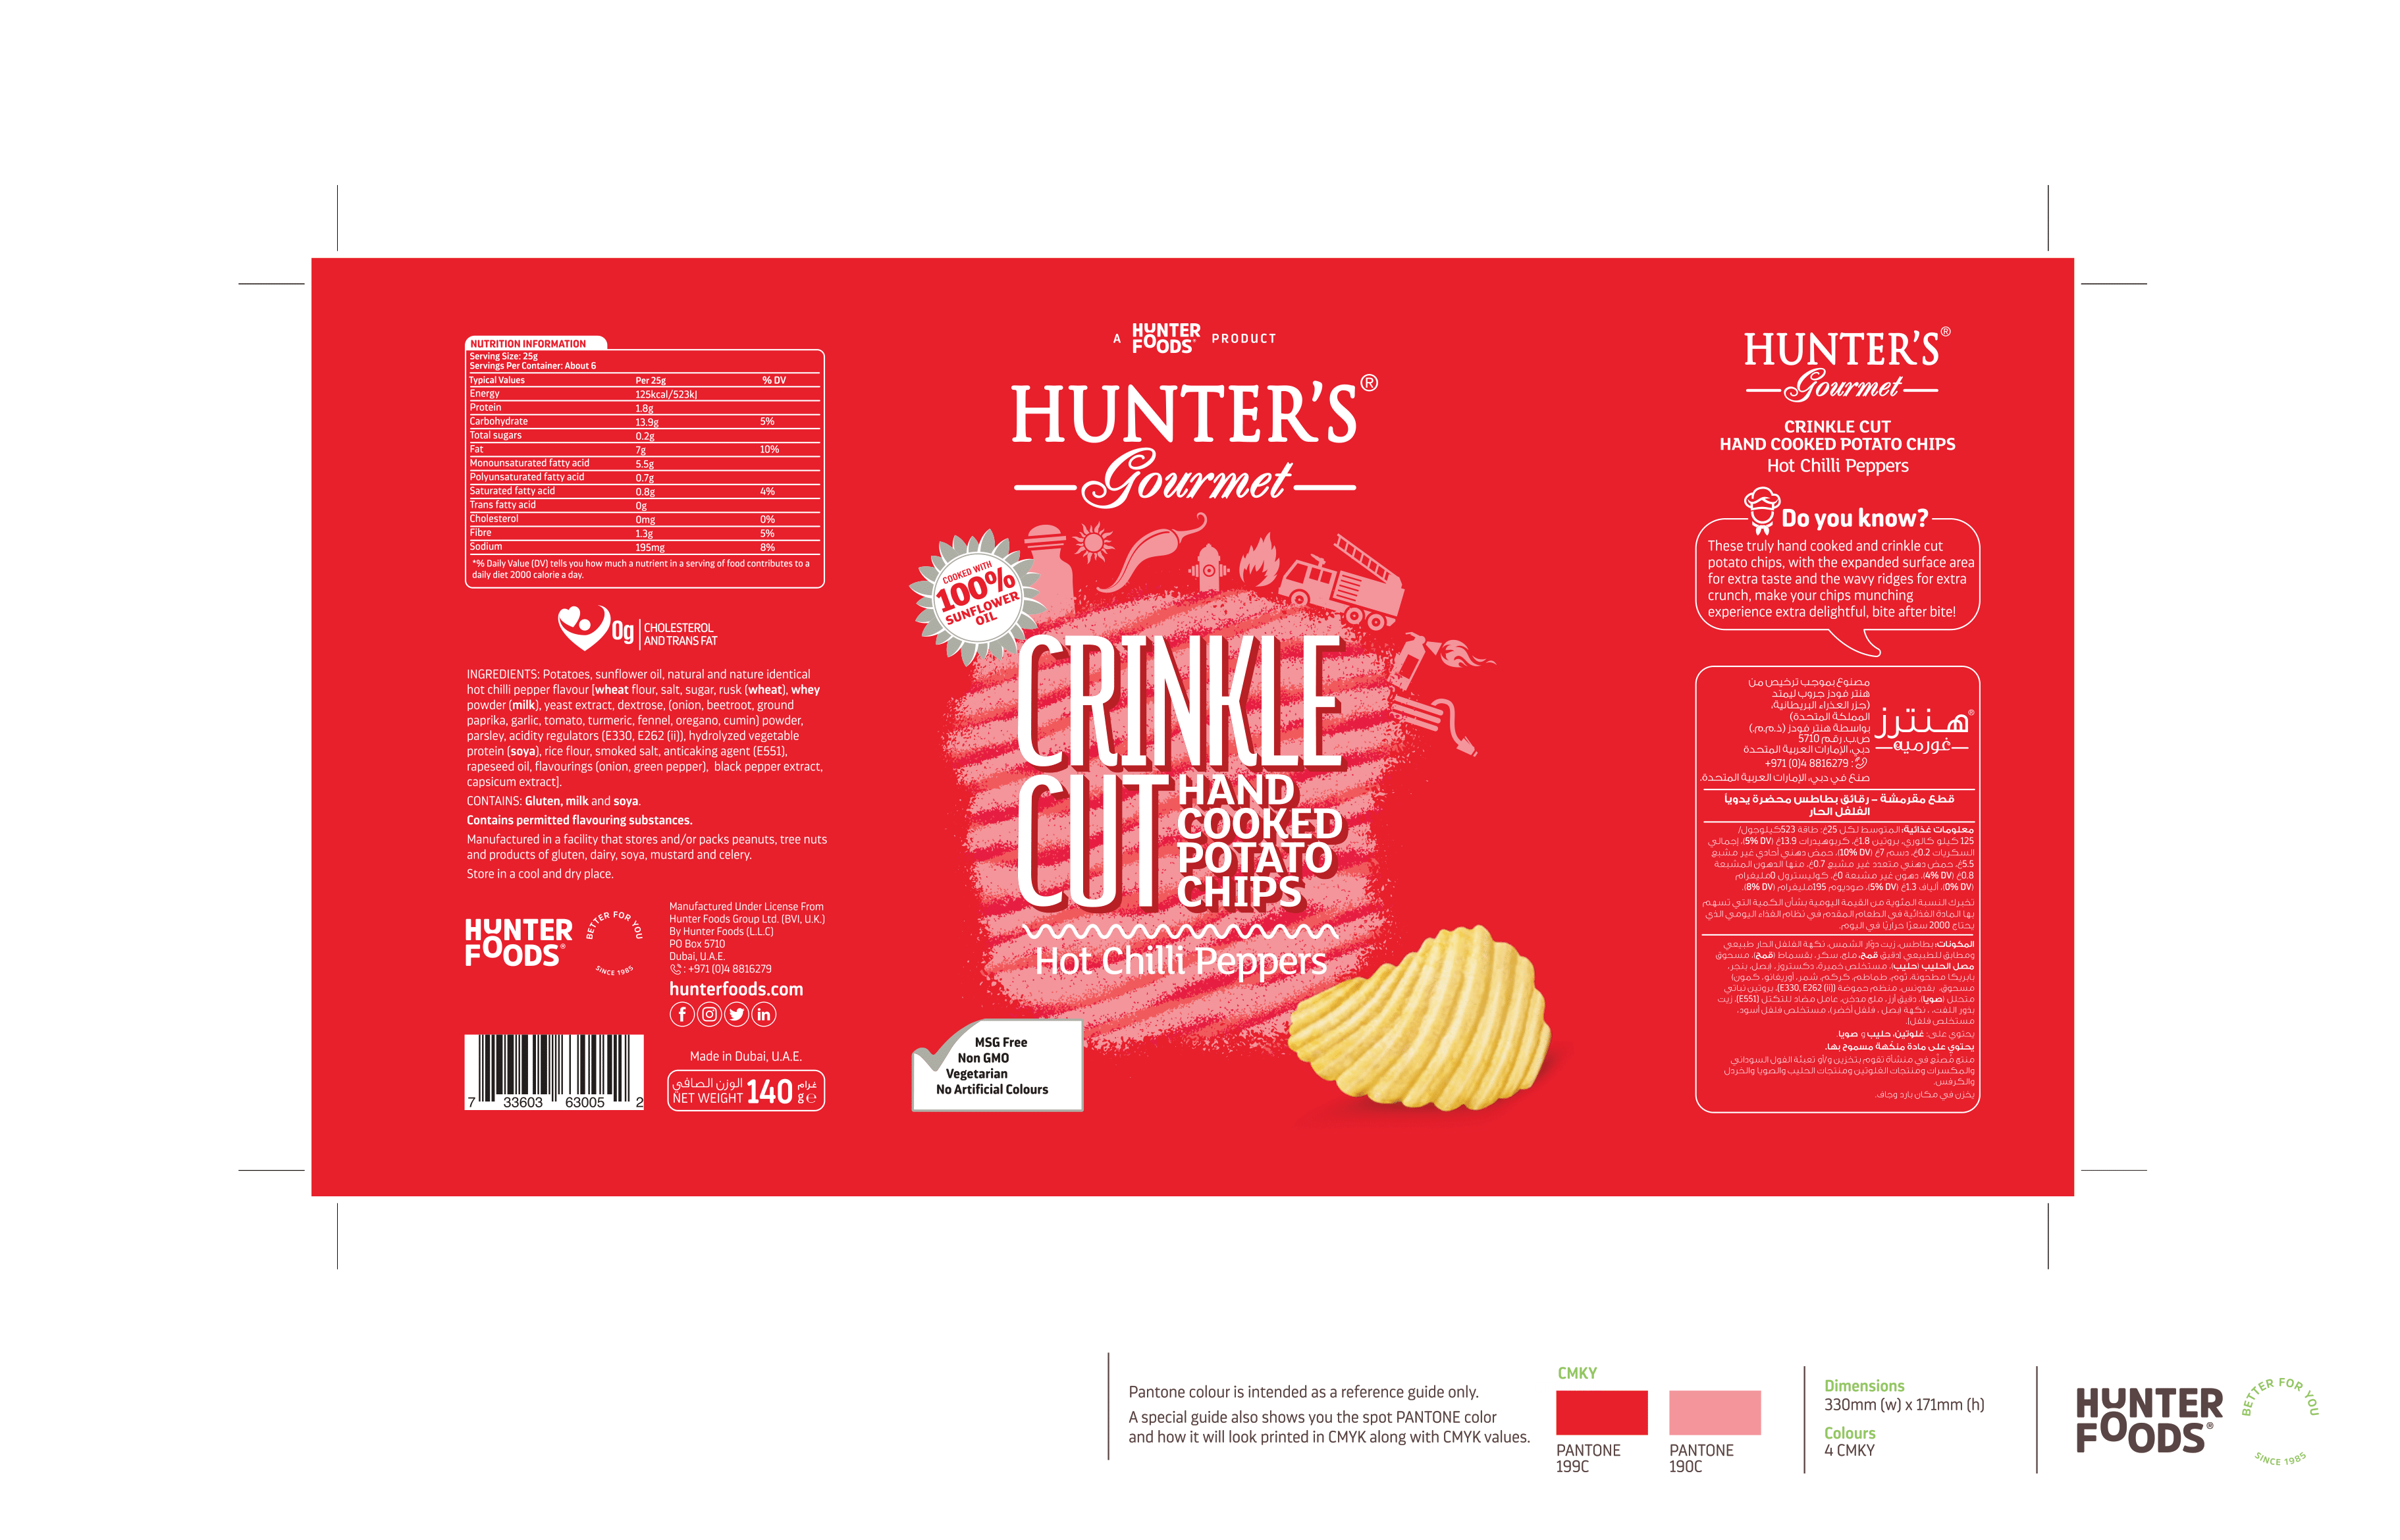 Hunter's Gourmet Hand Cooked Crinkled Chips Hot Chilli Peppers 12 units per case 140 g Product Label